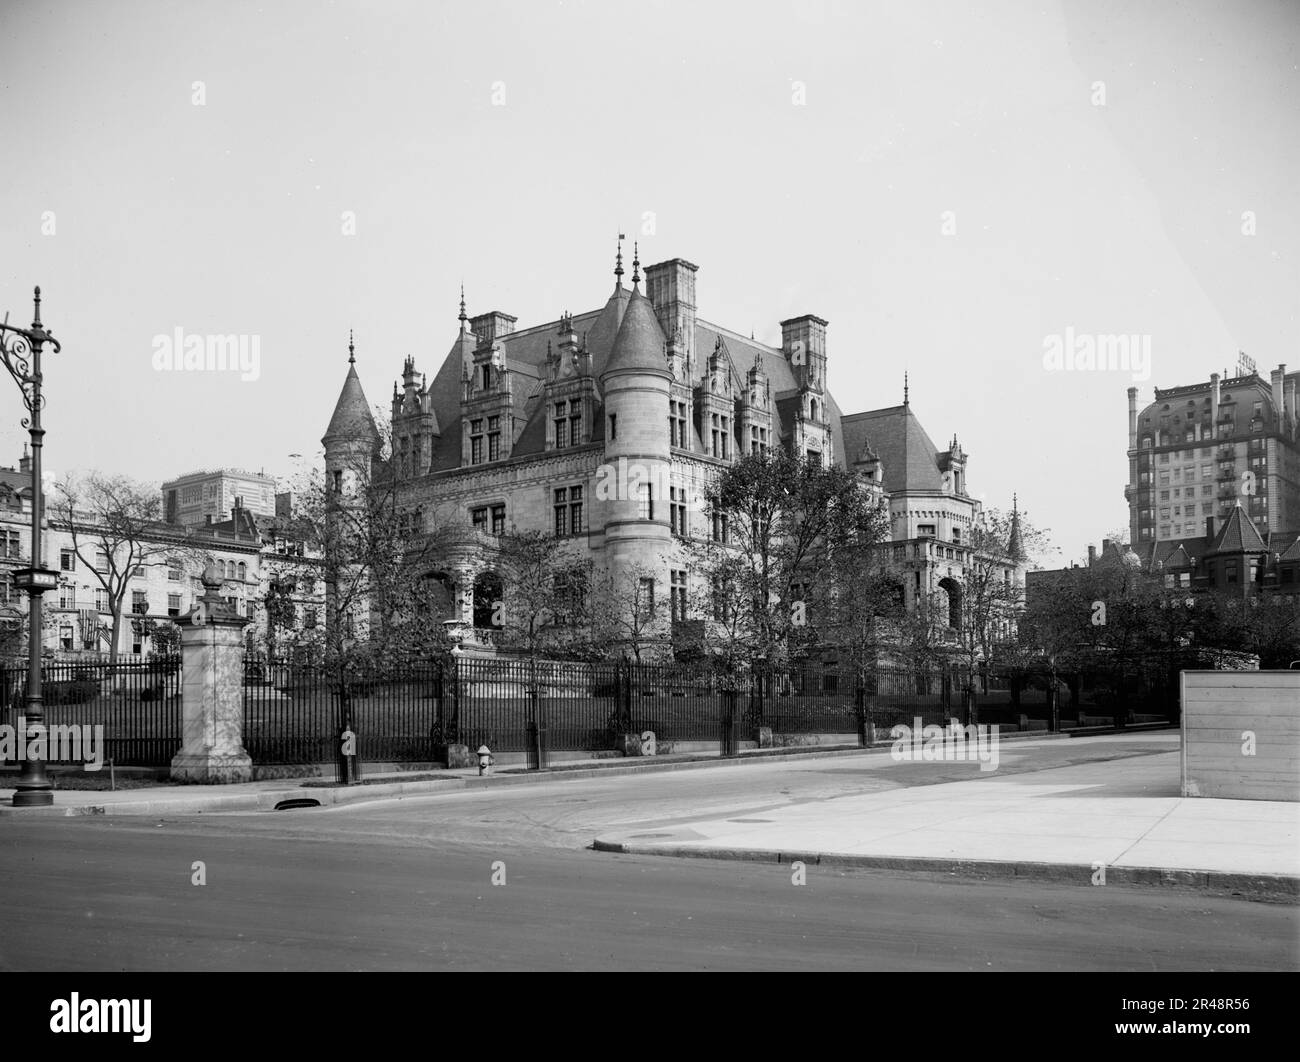 A Riverside Drive residence, New York, C.M. Schwab residence, between 1910 and 1920. Stock Photo